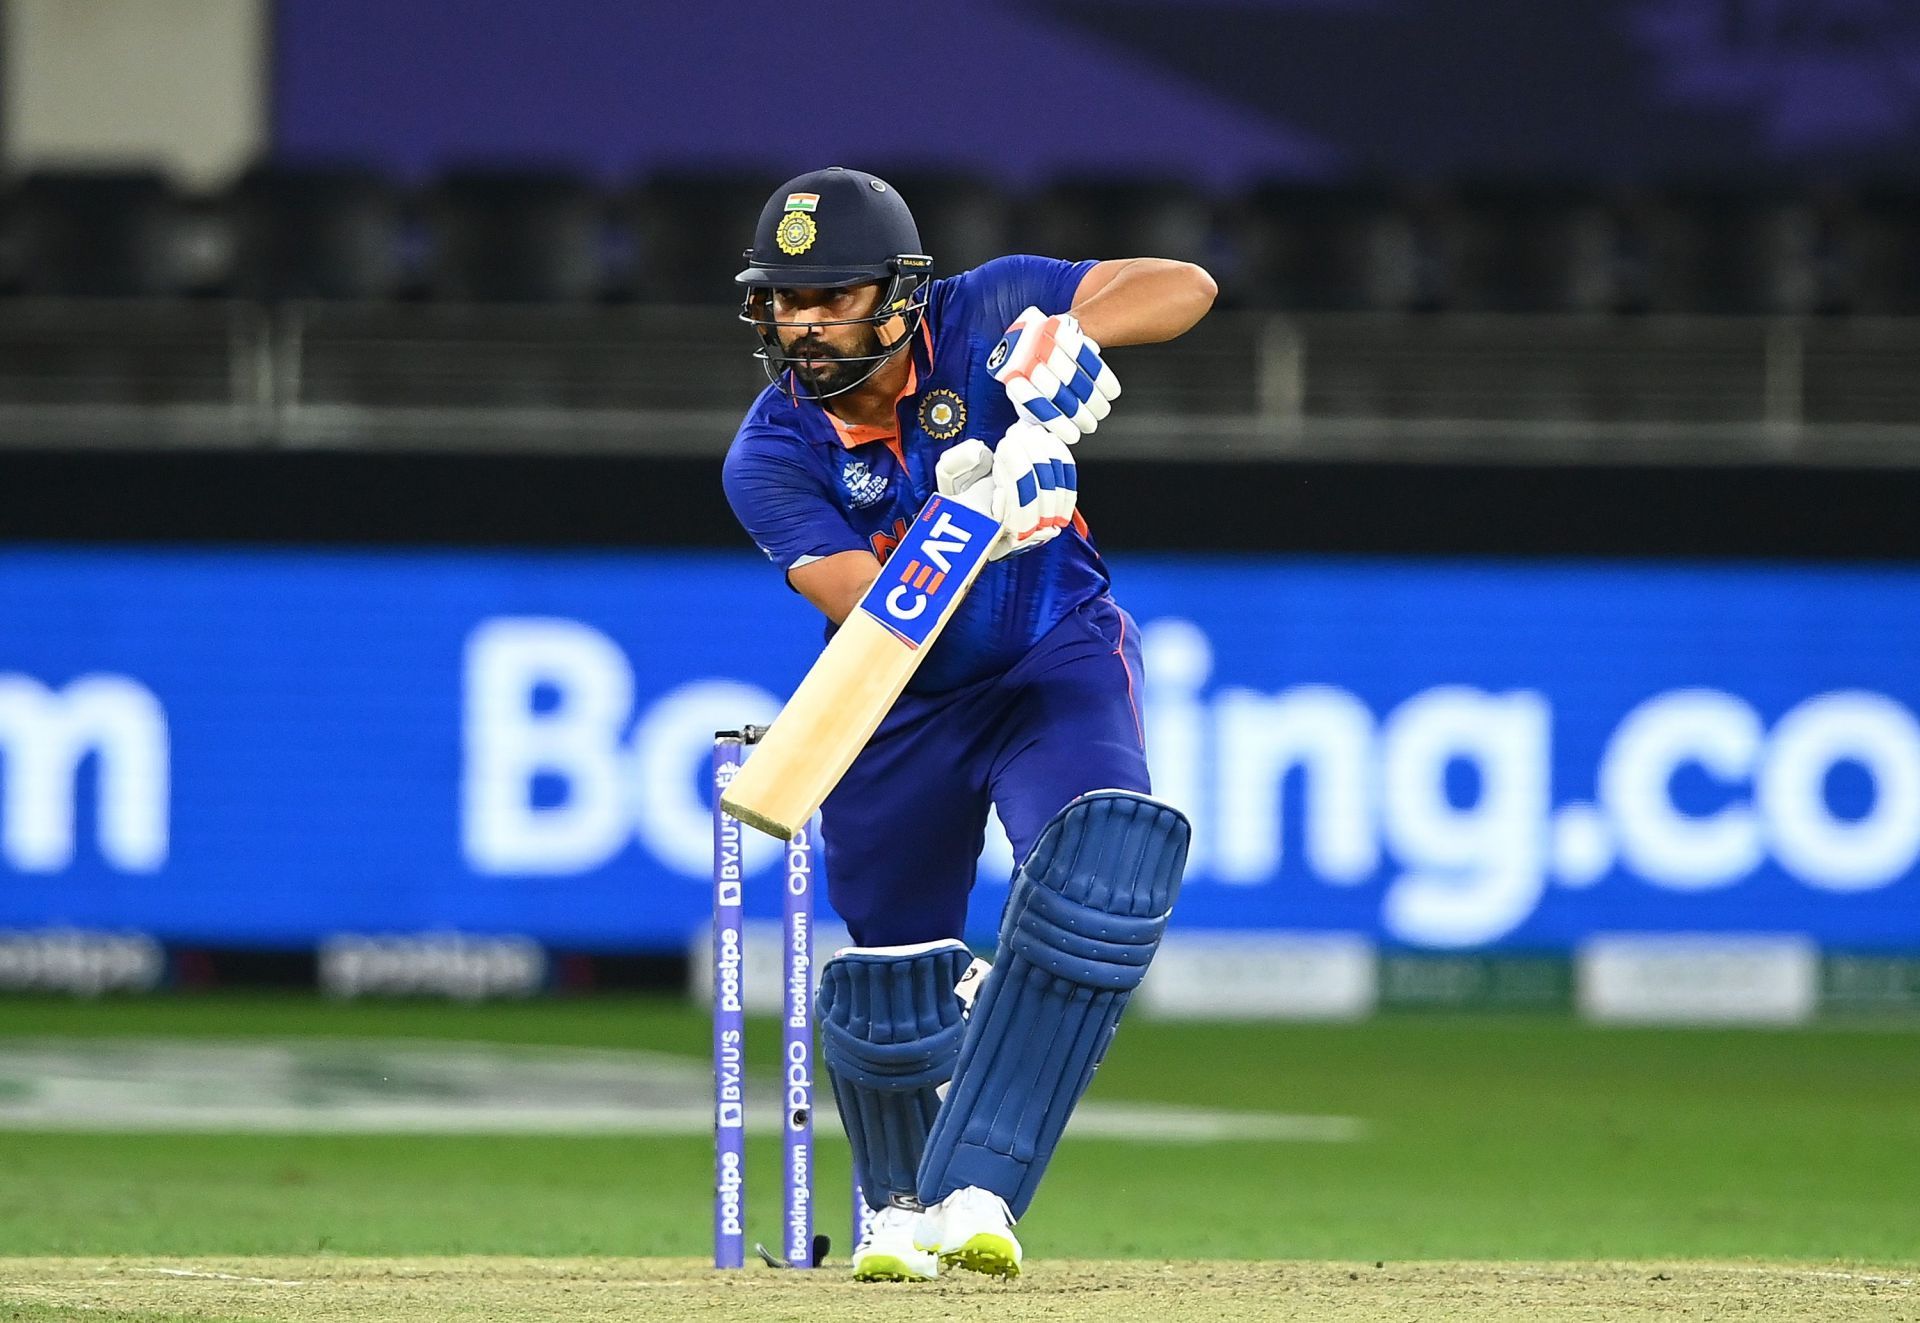 Rohit Sharma was duly chosen for the Player of the Match award